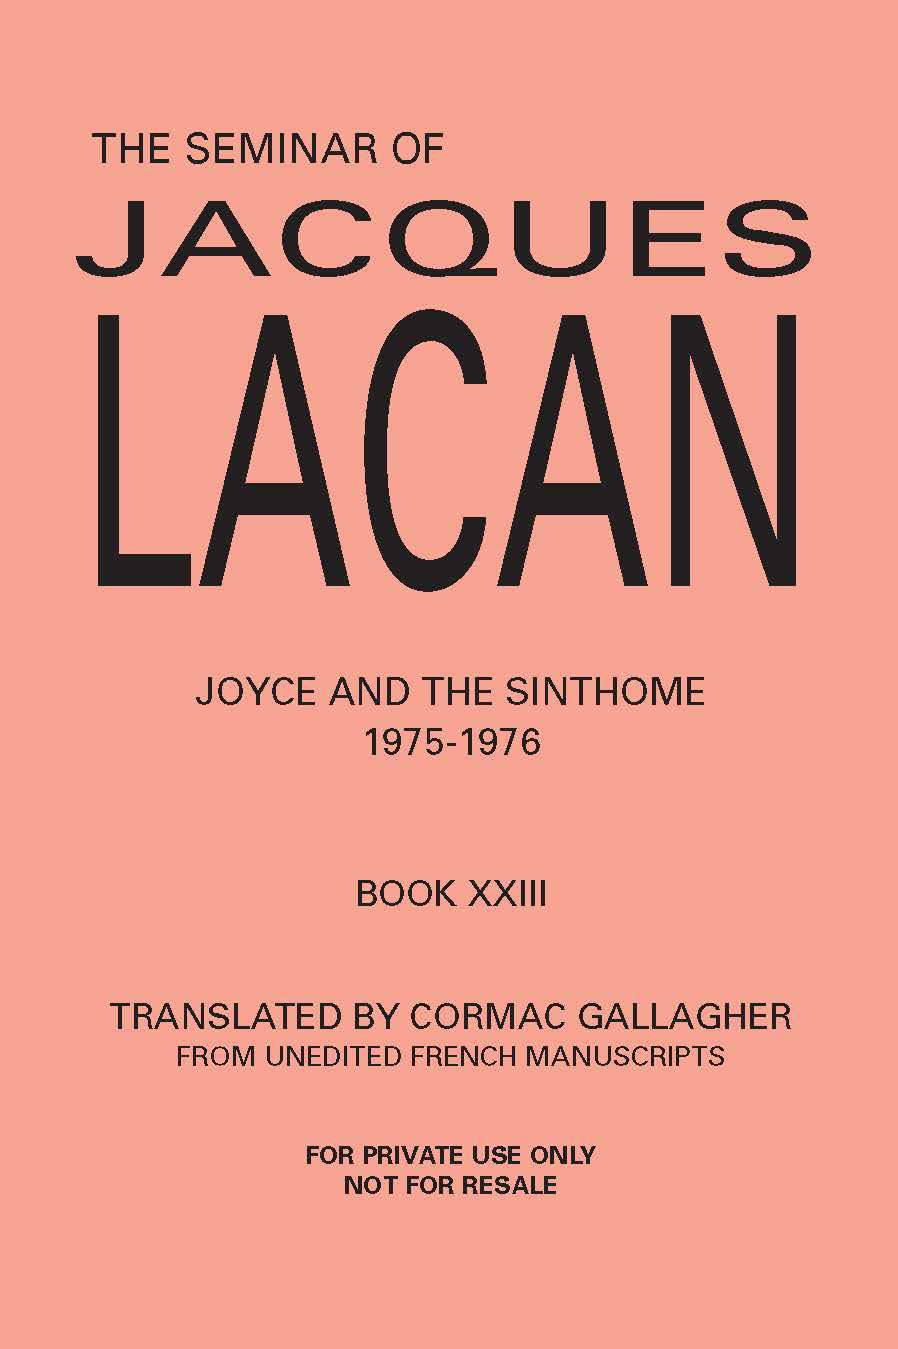 The Seminar of Jacques Lacan XXIII: Joyce and the Sinthome 1975-1976